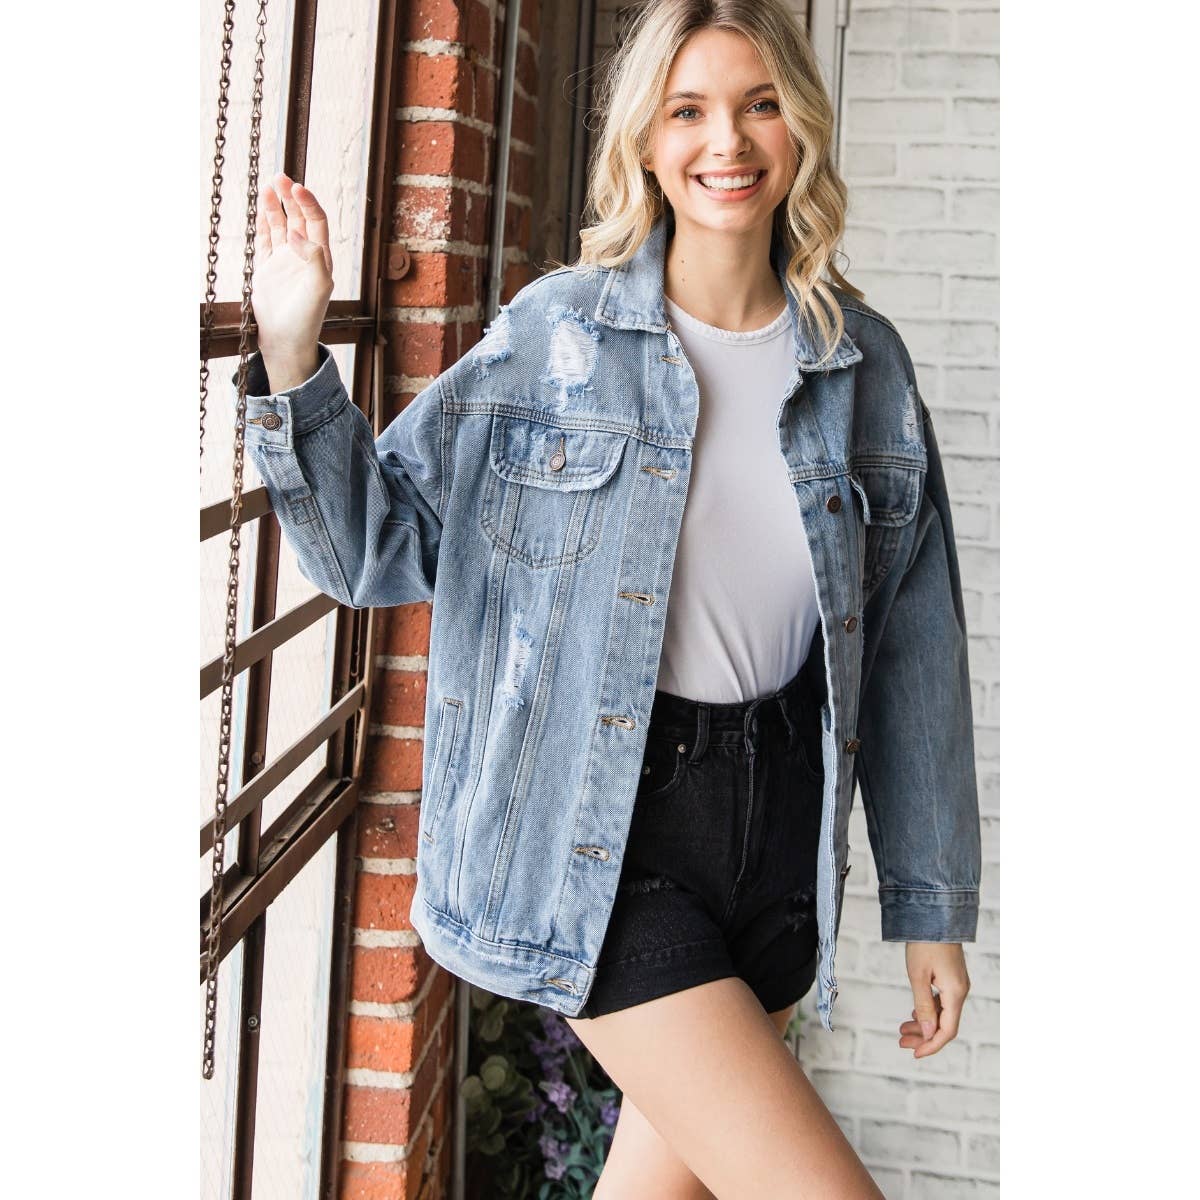 Plus Size Loose Denim Jacket With Long Sleeves And Ripped Detailing Spring  Casual Serremo Outerwear For Women T200319 From Xue04, $22.38 | DHgate.Com